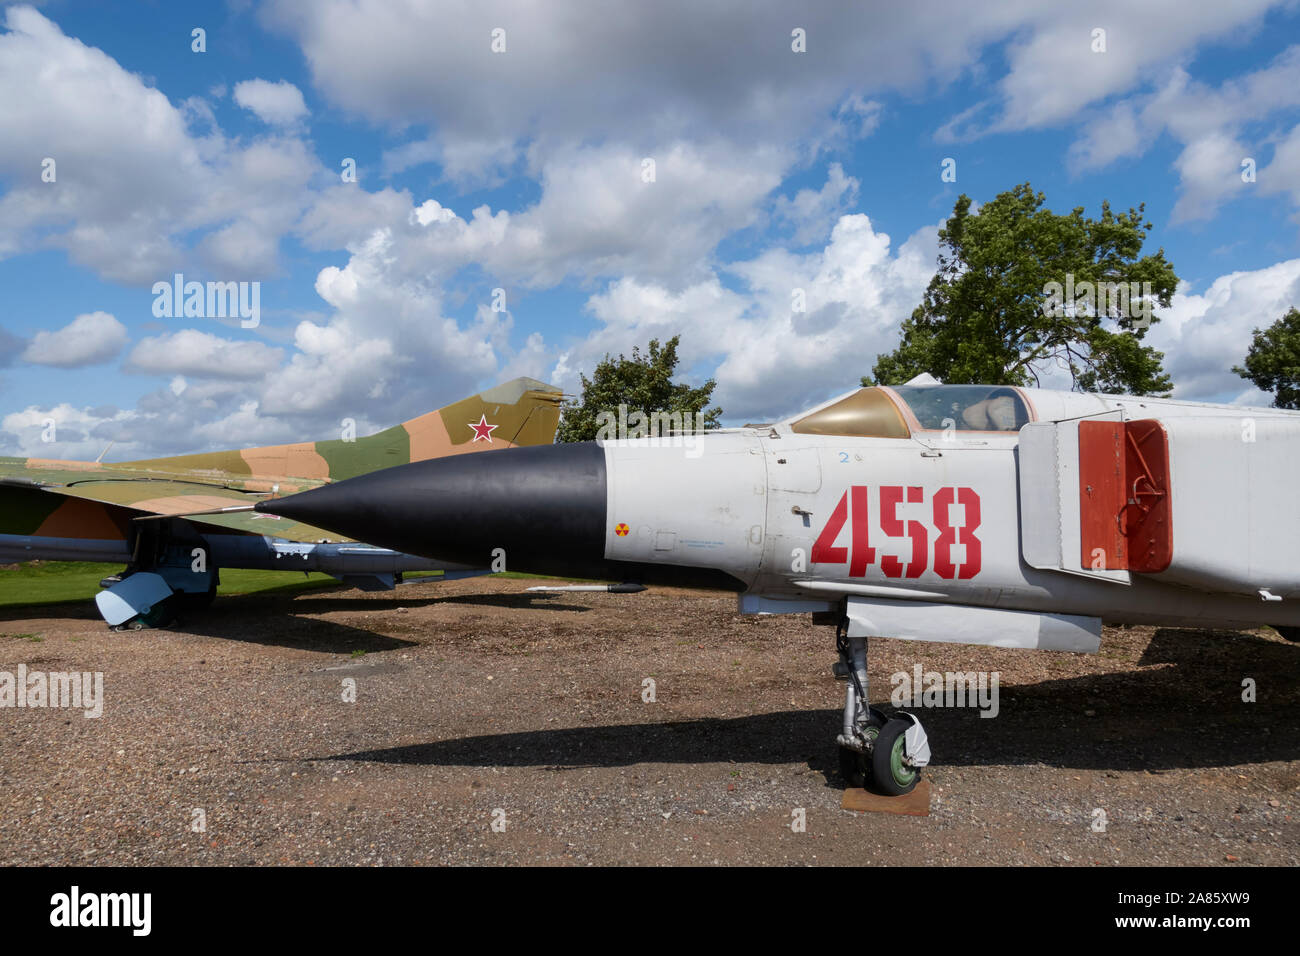 Nose section of a Mikoyan-Gurevich MiG-23ML “Flogger' interceptor aircraft on display at the Newark Air Museum, Nottinghamshire, England. Stock Photo